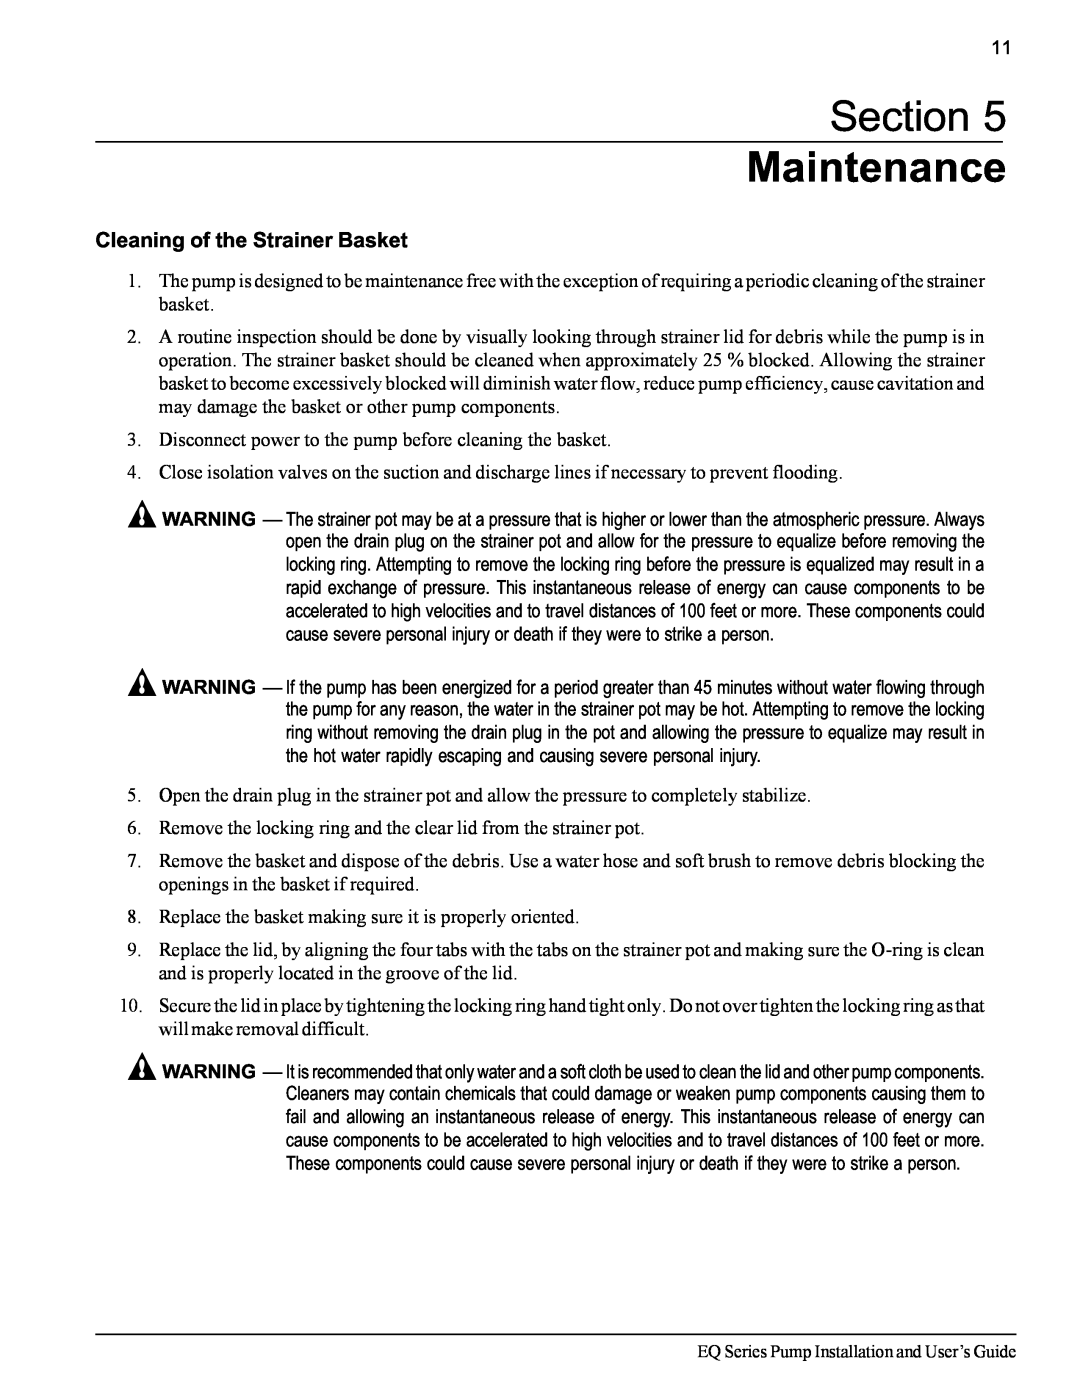 Pentair EQ SERIES important safety instructions Section Maintenance, Cleaning of the Strainer Basket 